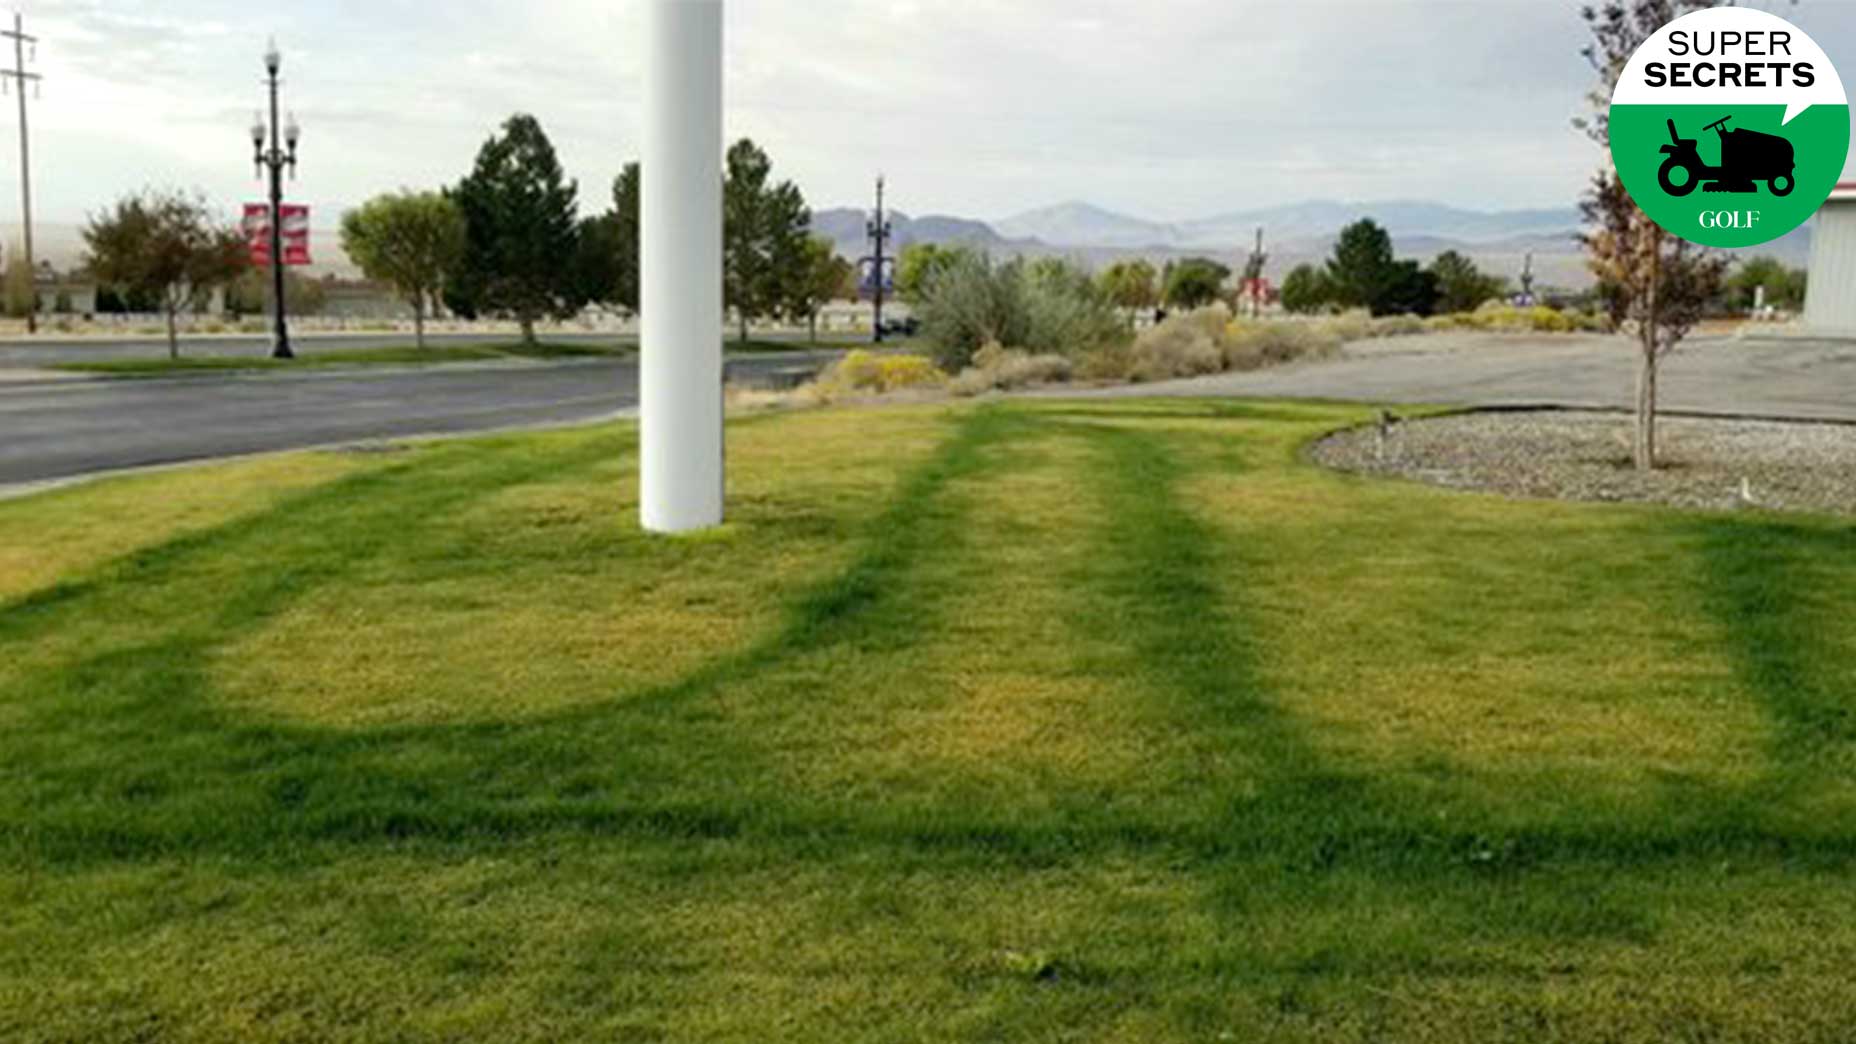 Image of Lawn that has been fertilized with double dark fertilizer